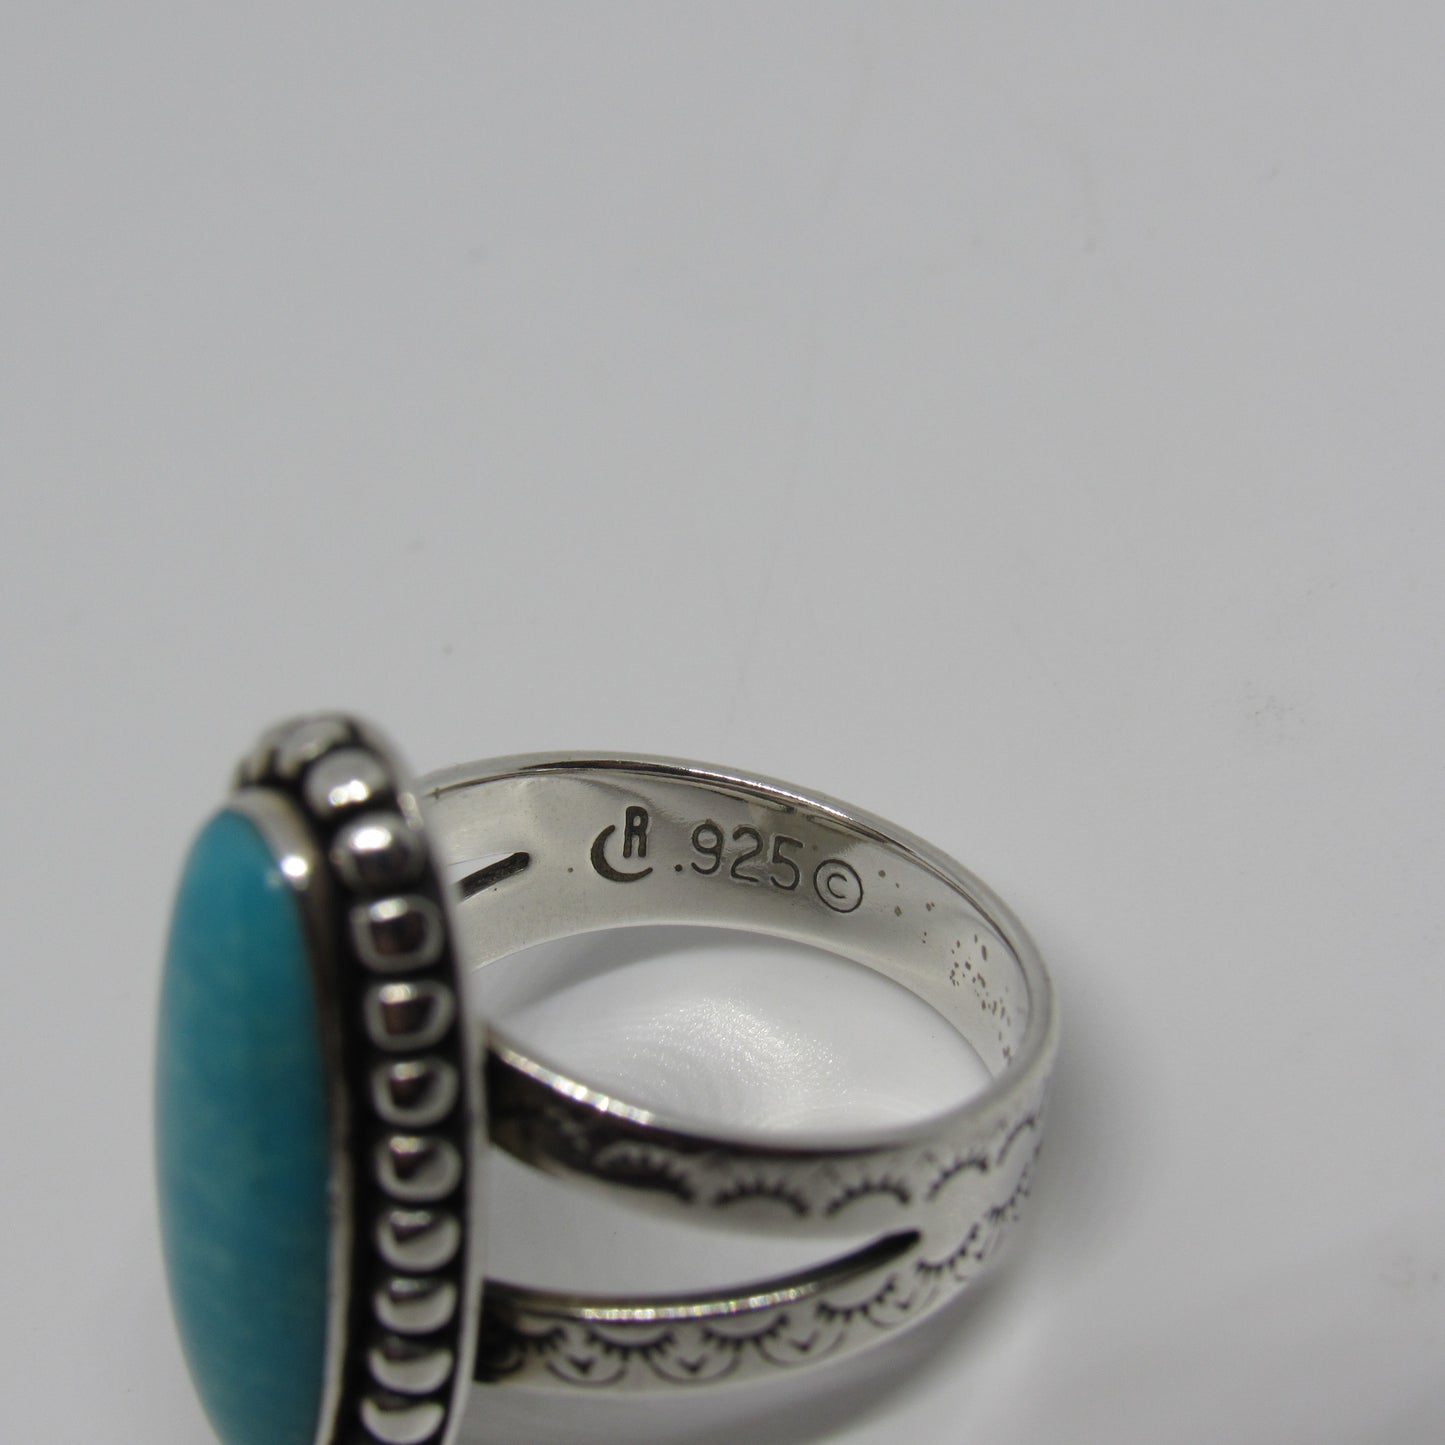 Sterling Silver Relios Carolyn Pollack Oval Turquoise Ring - Sz 7.5